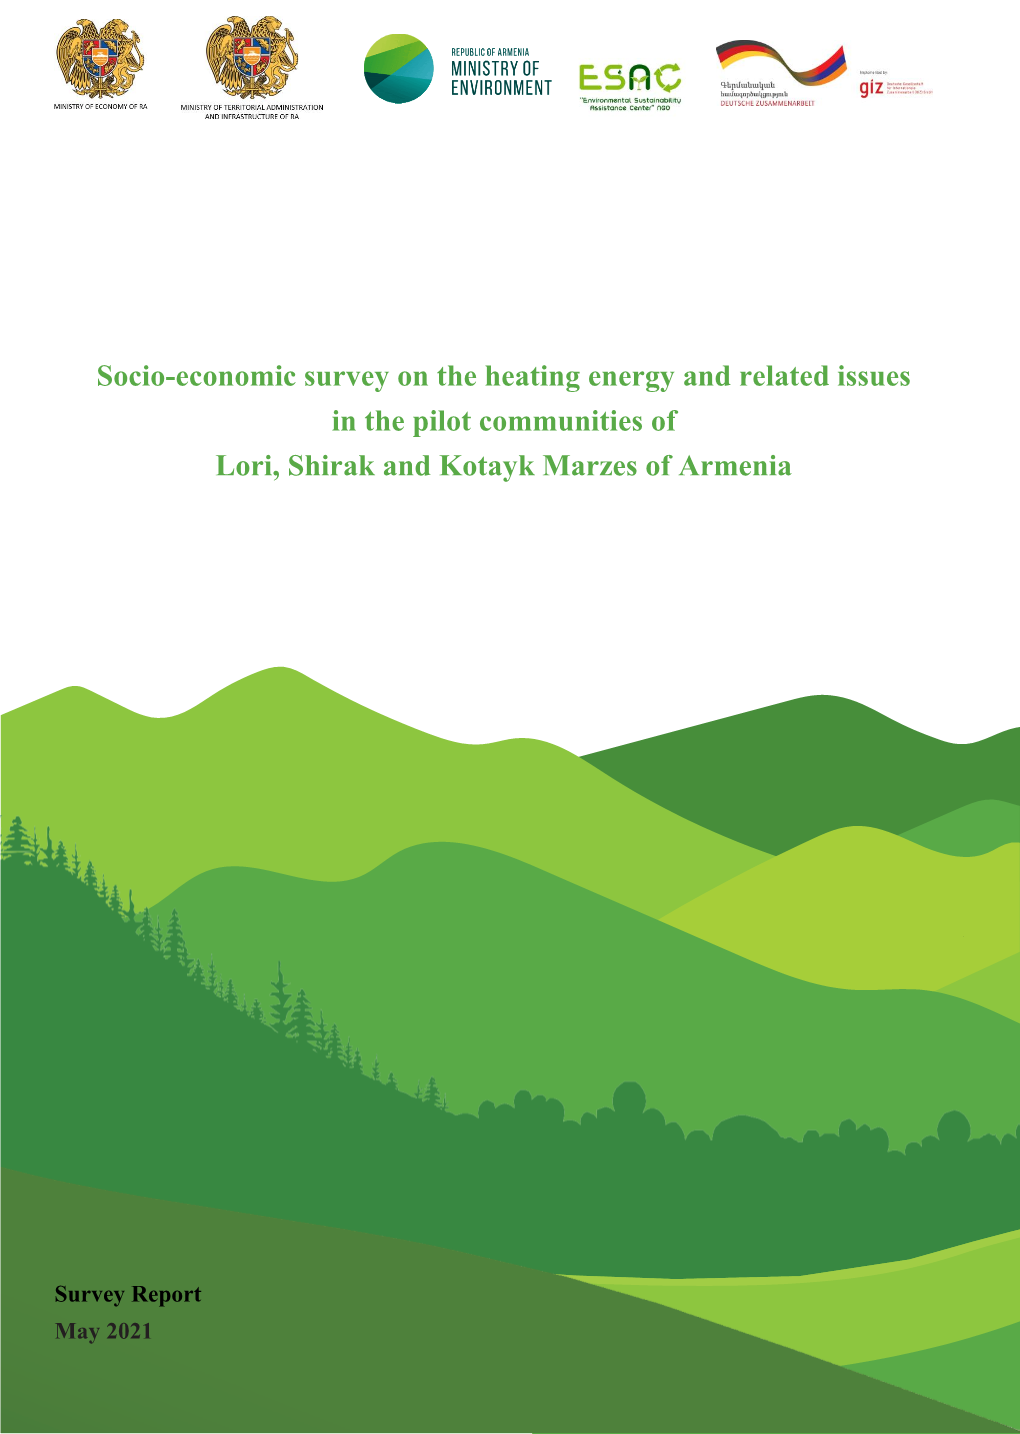 Socio-Economic Survey on the Heating Energy and Related Issues in the Pilot Communities of Lori, Shirak and Kotayk Marzes of Armenia